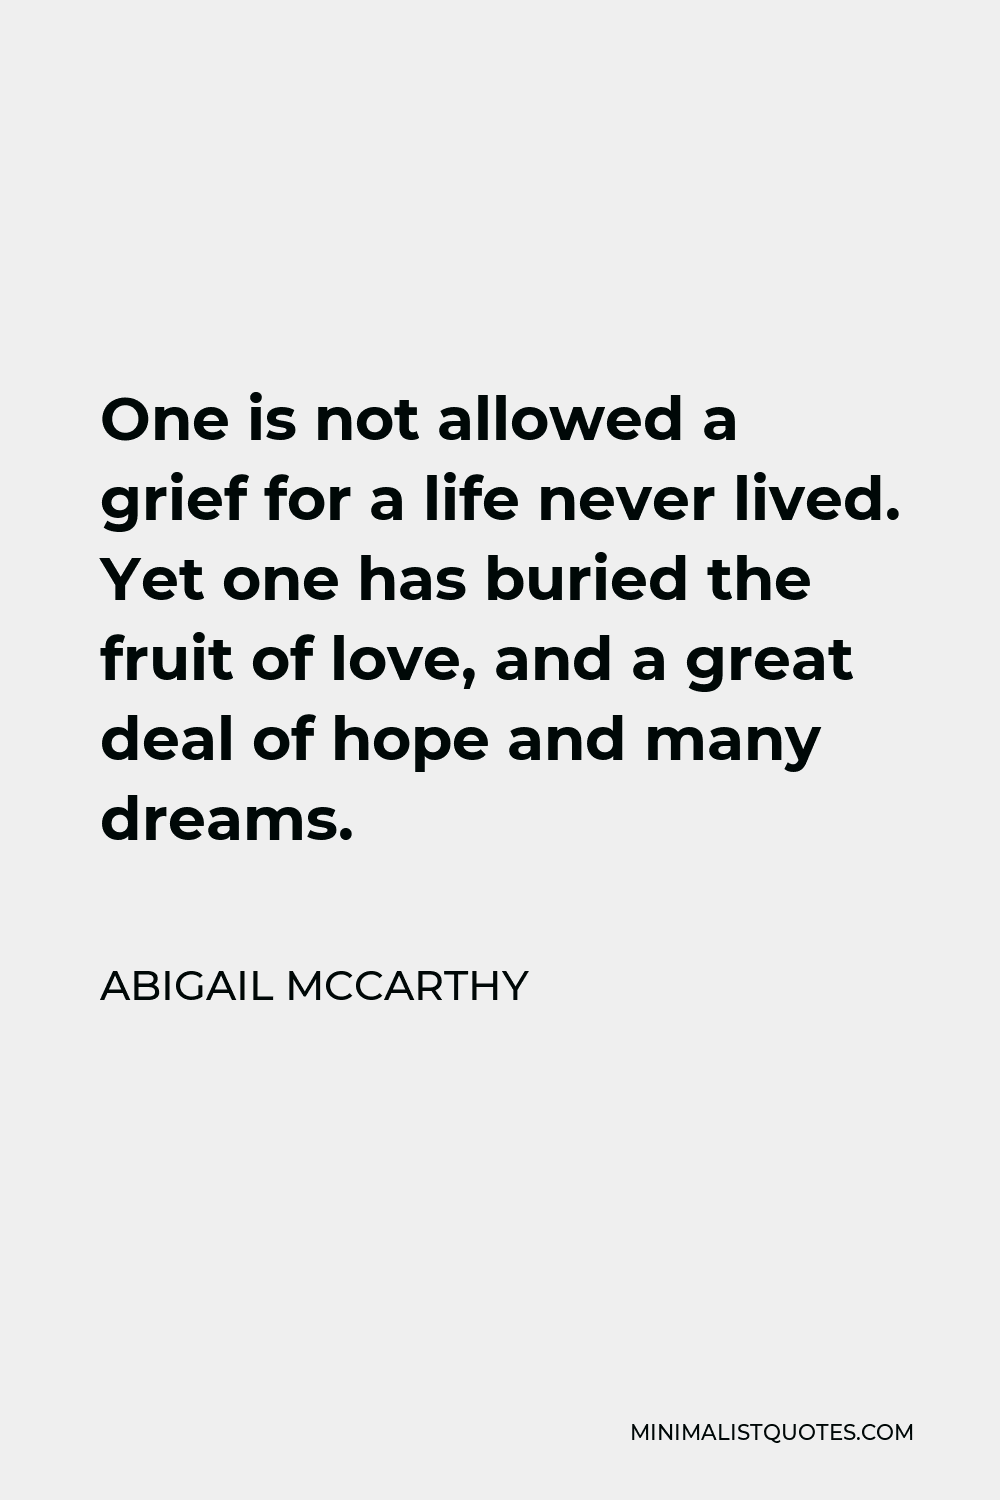 Abigail McCarthy Quote - One is not allowed a grief for a life never lived. Yet one has buried the fruit of love, and a great deal of hope and many dreams.